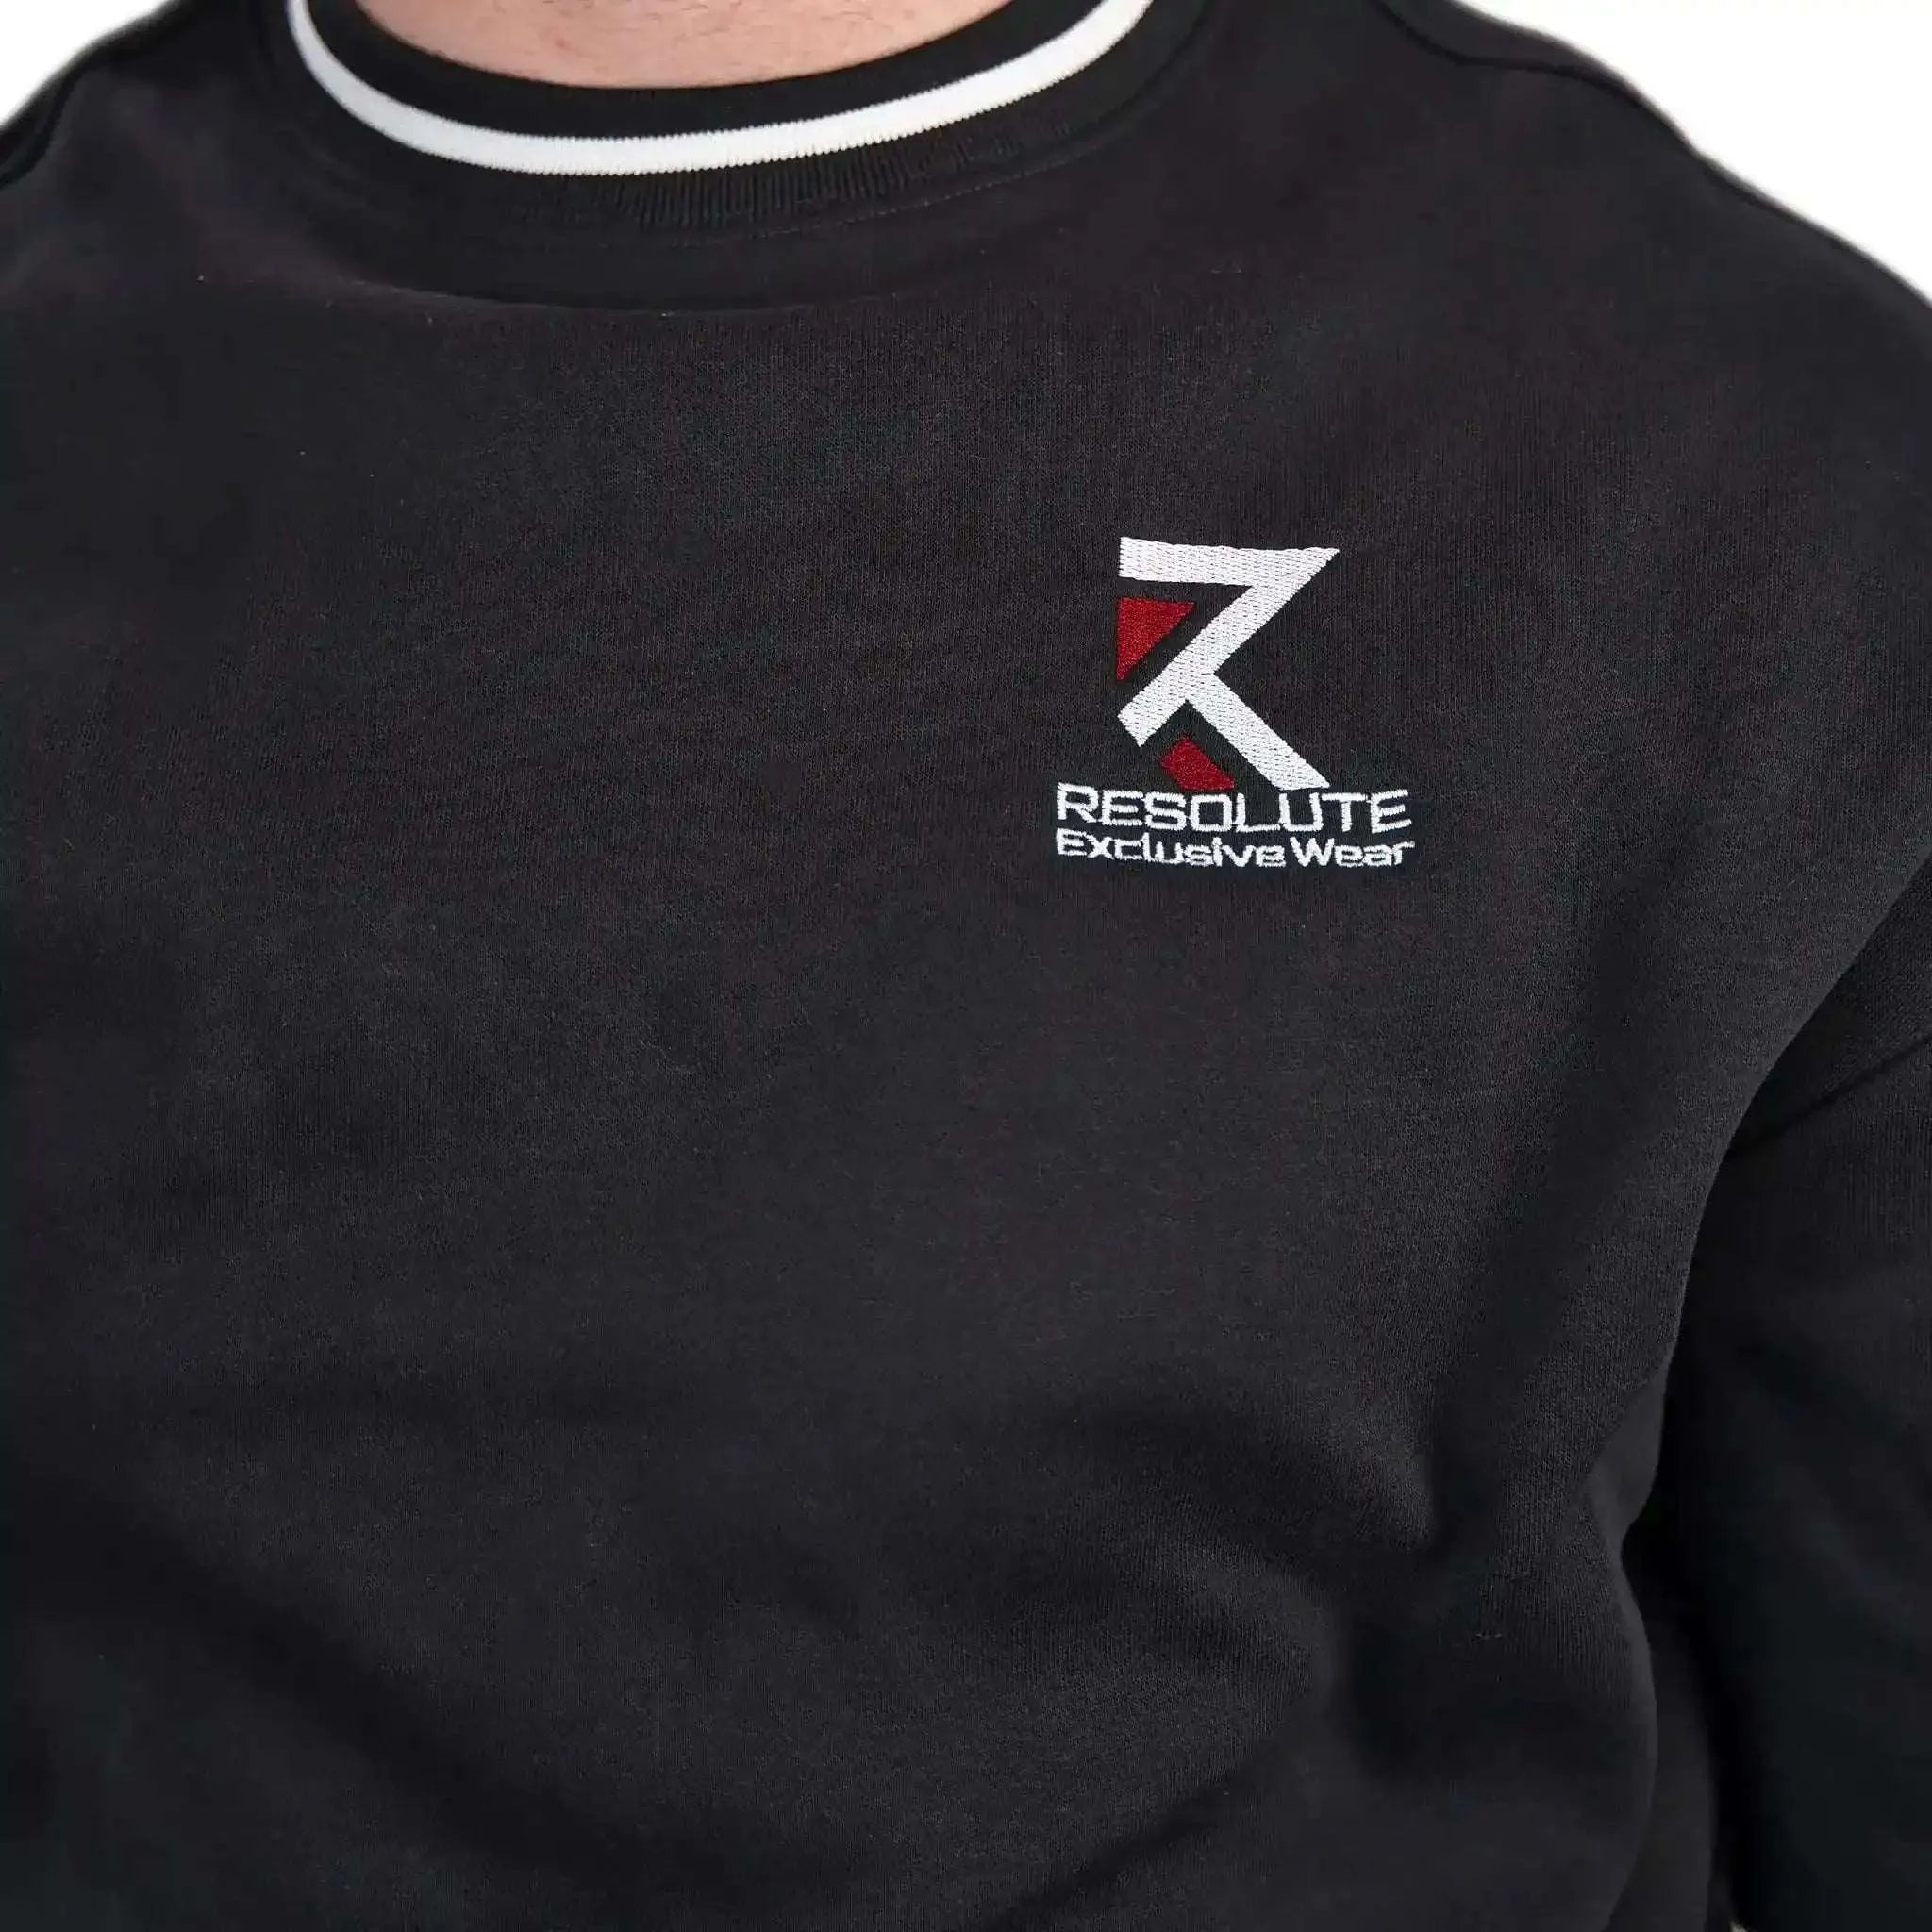 College Crewneck Sweater, Sweater, Clothing, Resolute Exclusive Wear